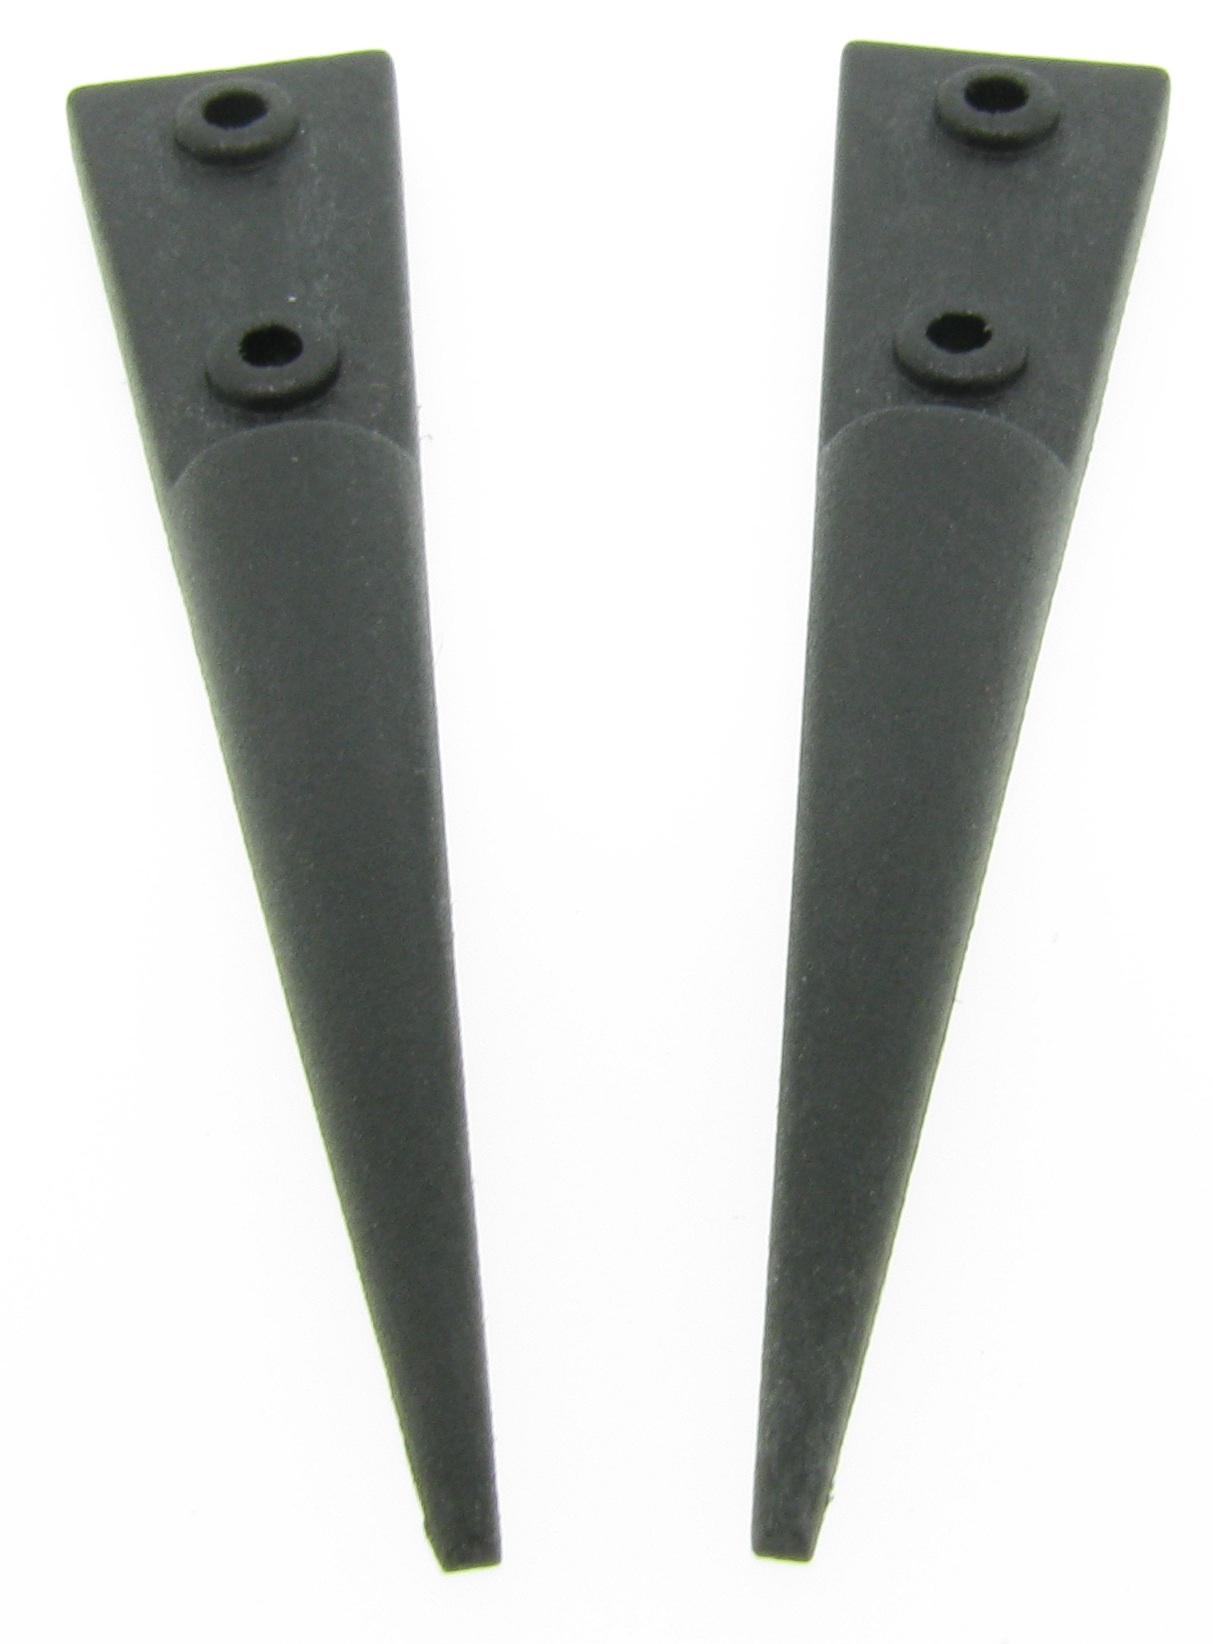 Excelta 159B-RTX Carbofib Replacement Tweezer Tips for 159B-RT close up